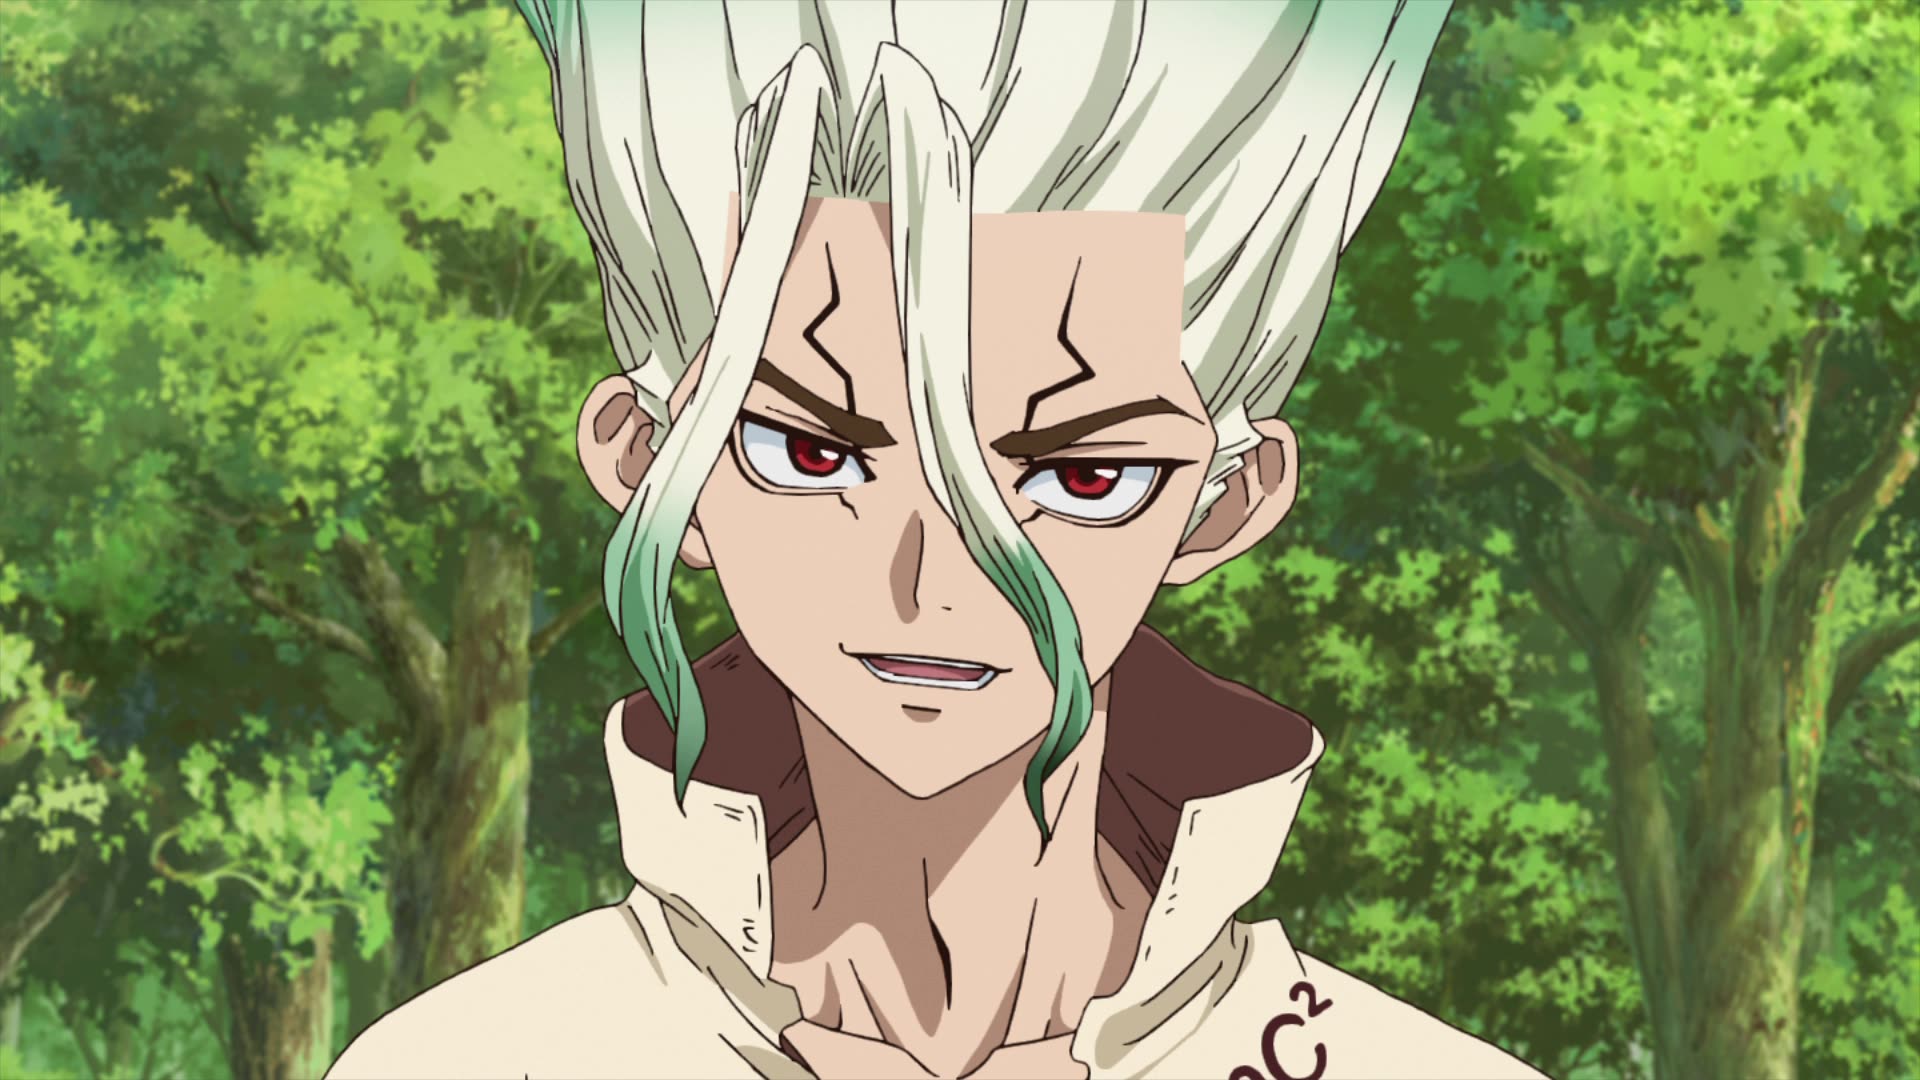 Dr. STONE (German Dub) Episode 20, The Age of Energy, - Watch on Crunchyroll